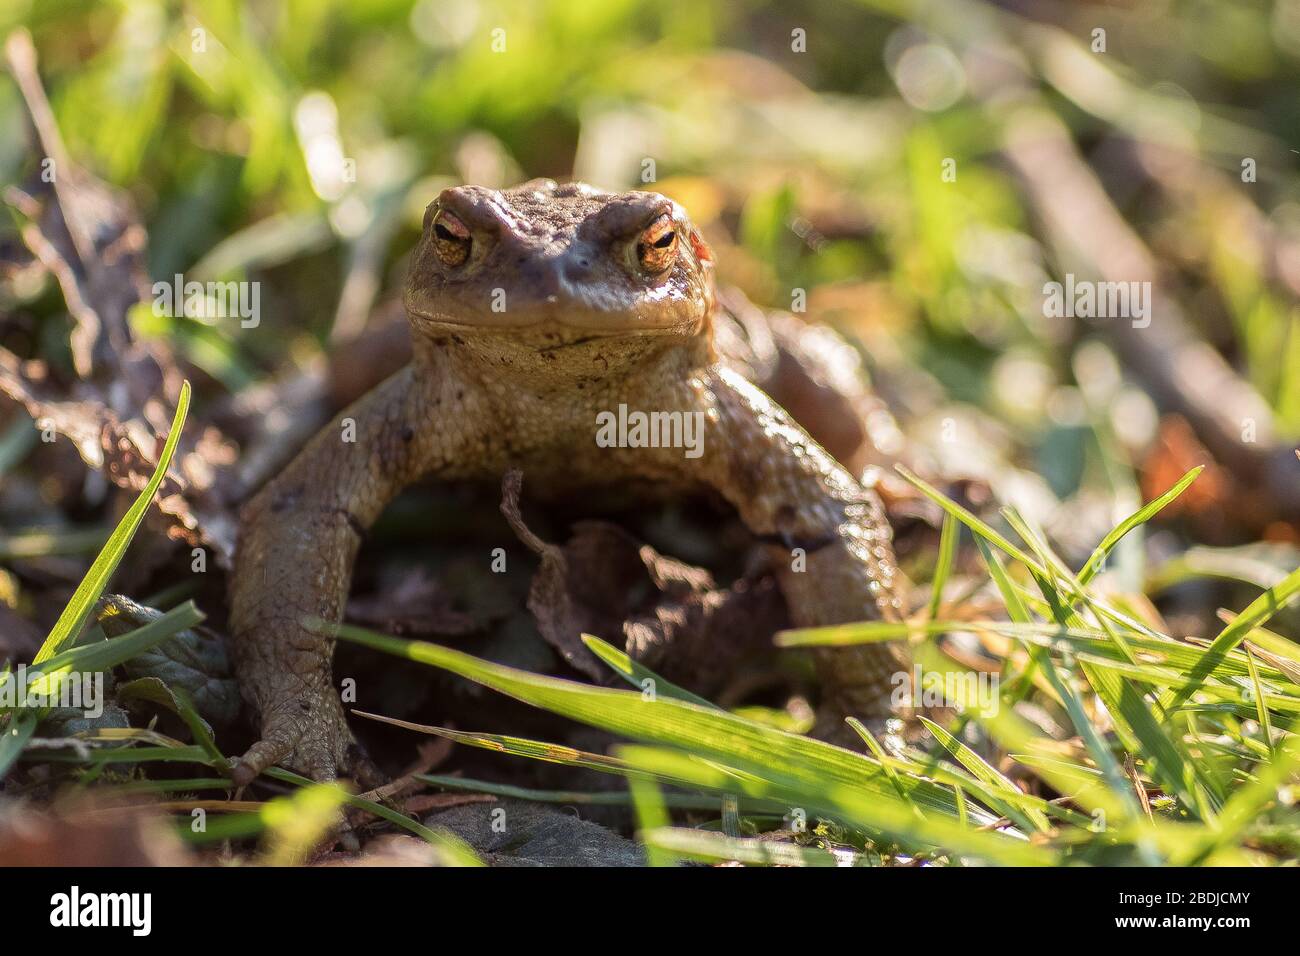 a toad / frog, amphibians Stock Photo